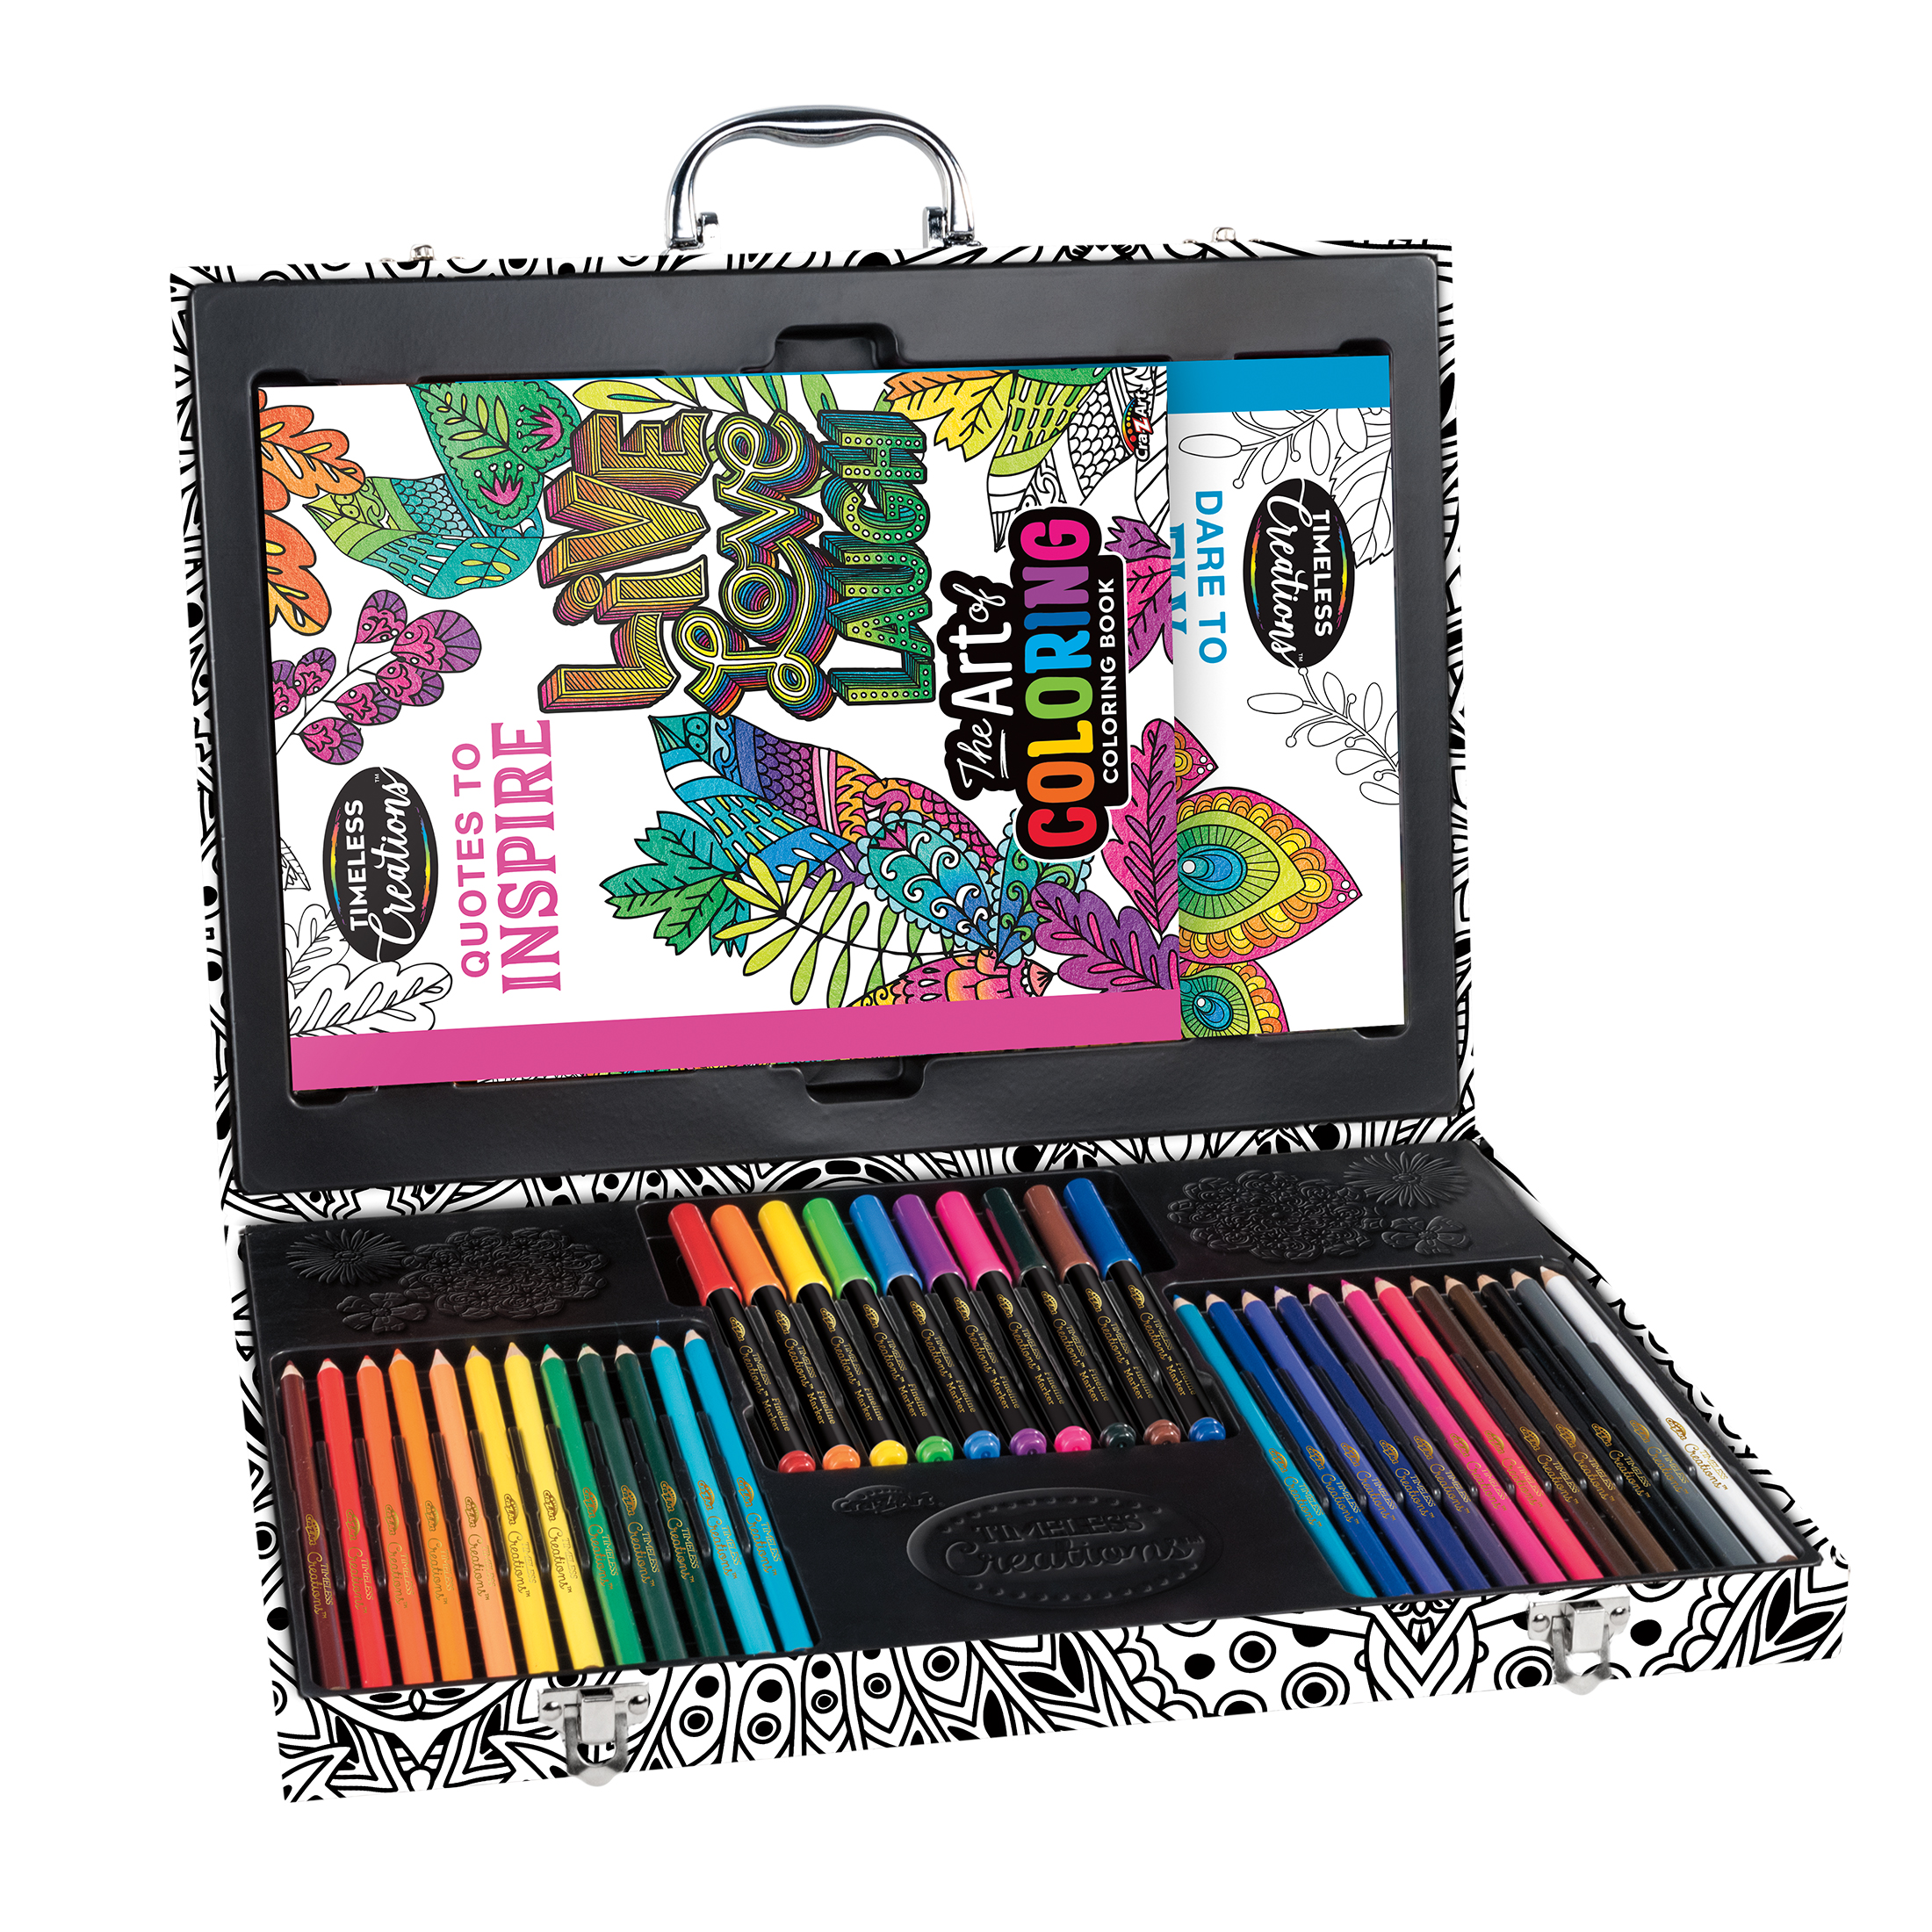 Cra-Z-Art Timeless Creations Multicolor Adult Coloring Drawing Set, Beginner to Expert - image 5 of 9